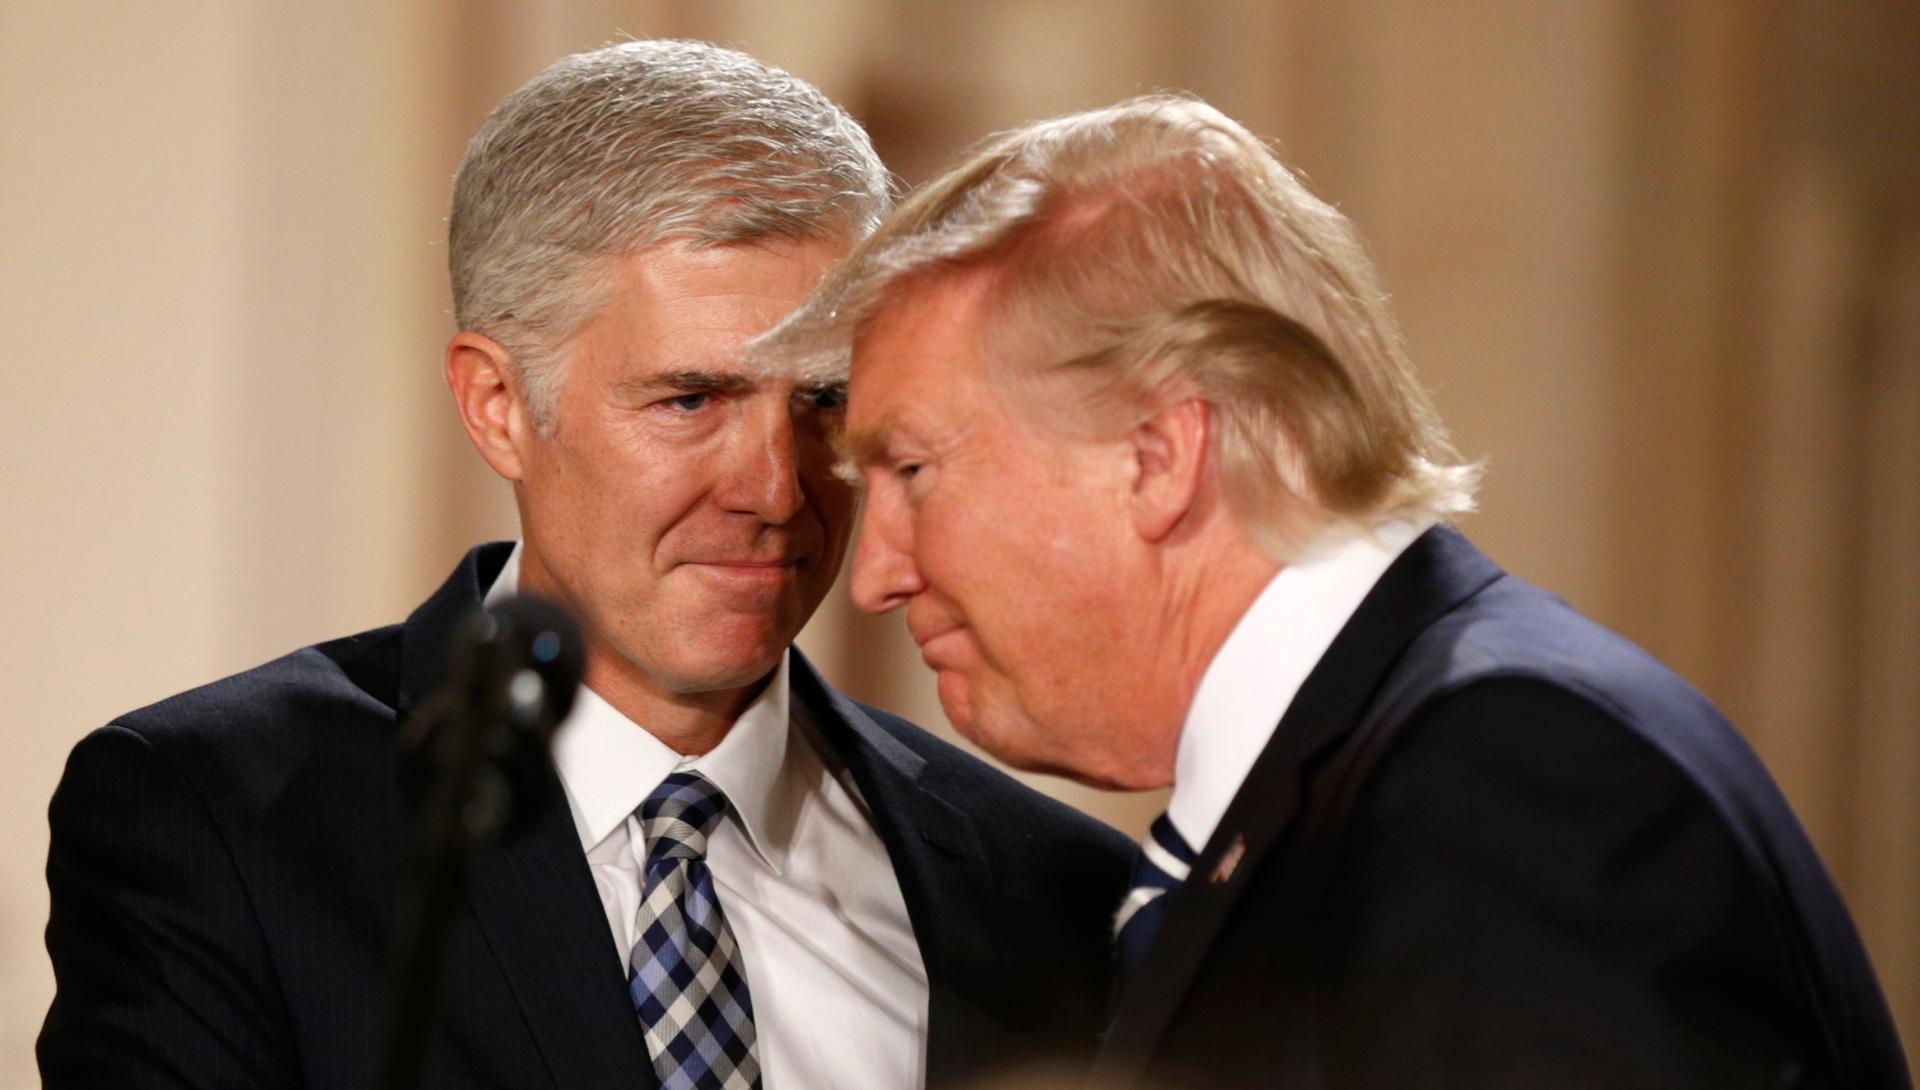 US President Donald Trump and Neil Gorsuch smile as Trump nominates Gorsuch to be an associate justice of the US Supreme Court at the White House in Washington, D.C., January 31, 2017.